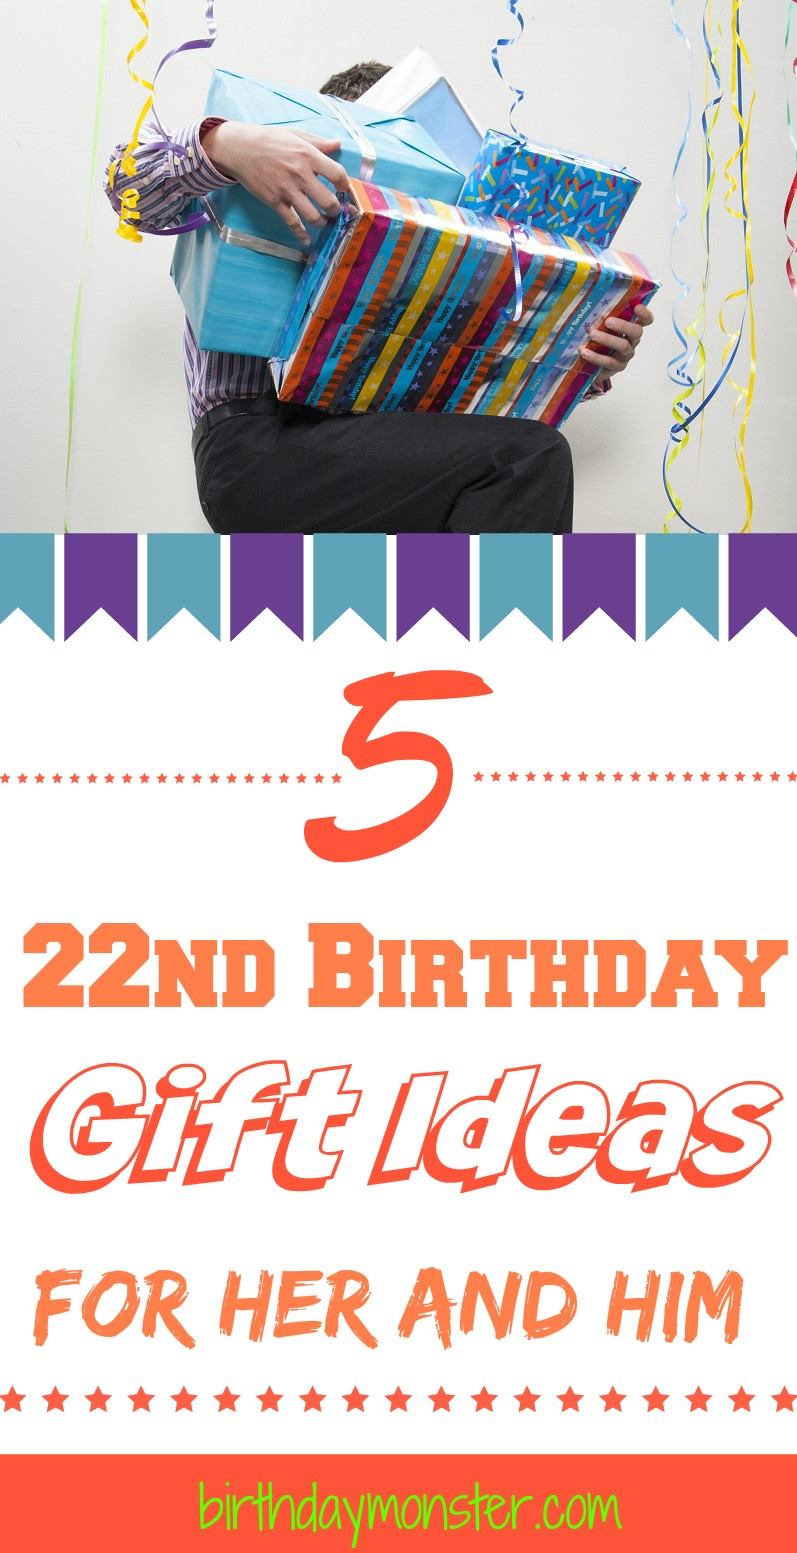 22Nd Birthday Gift Ideas
 22nd Birthday Gift Ideas for Her and Him Birthday Monster